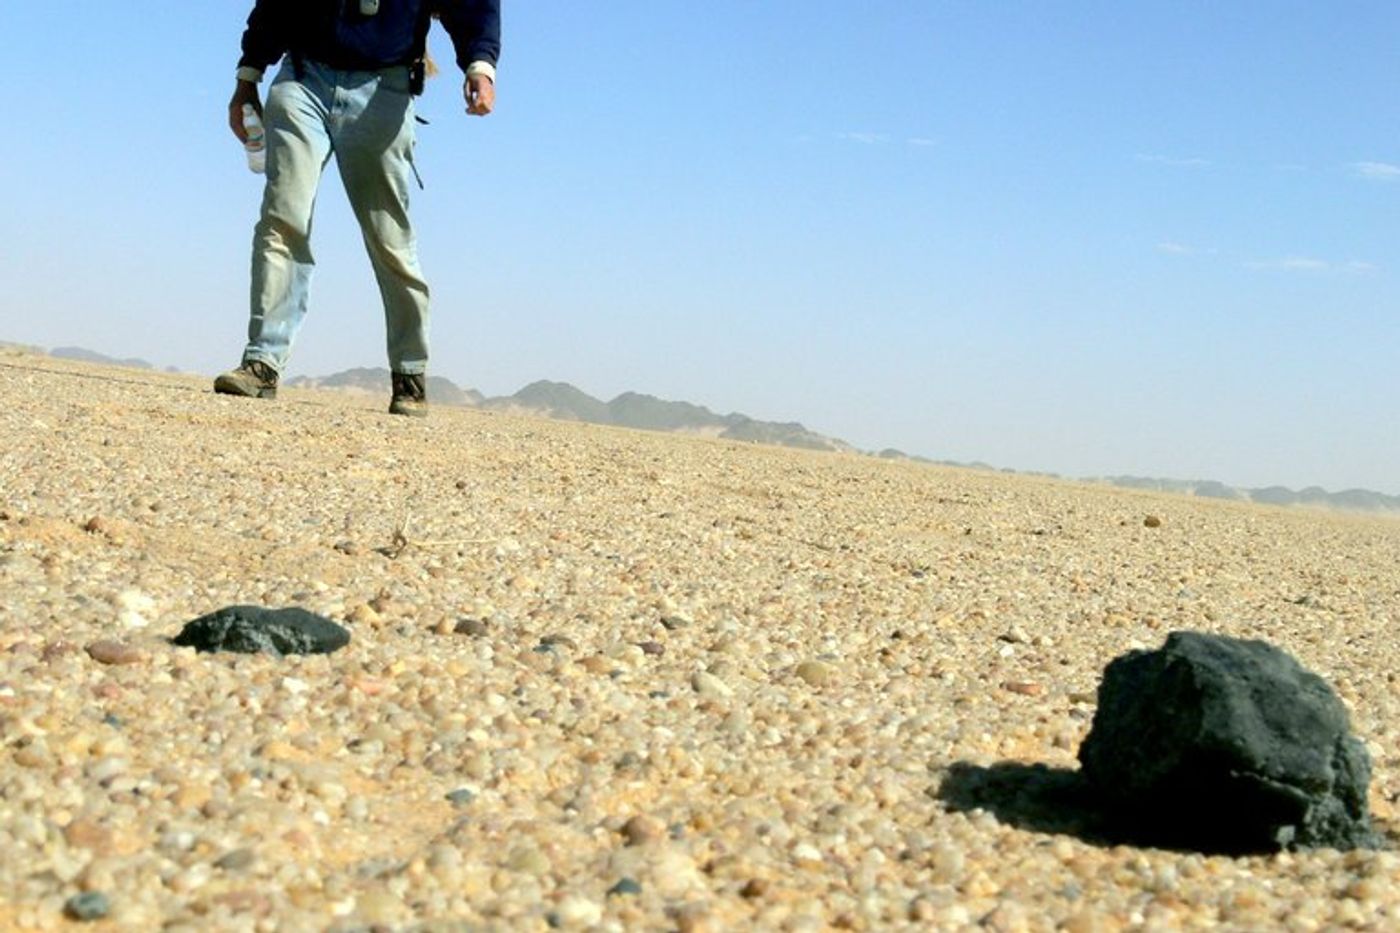 An image showing the meteorite recovered from the desert.